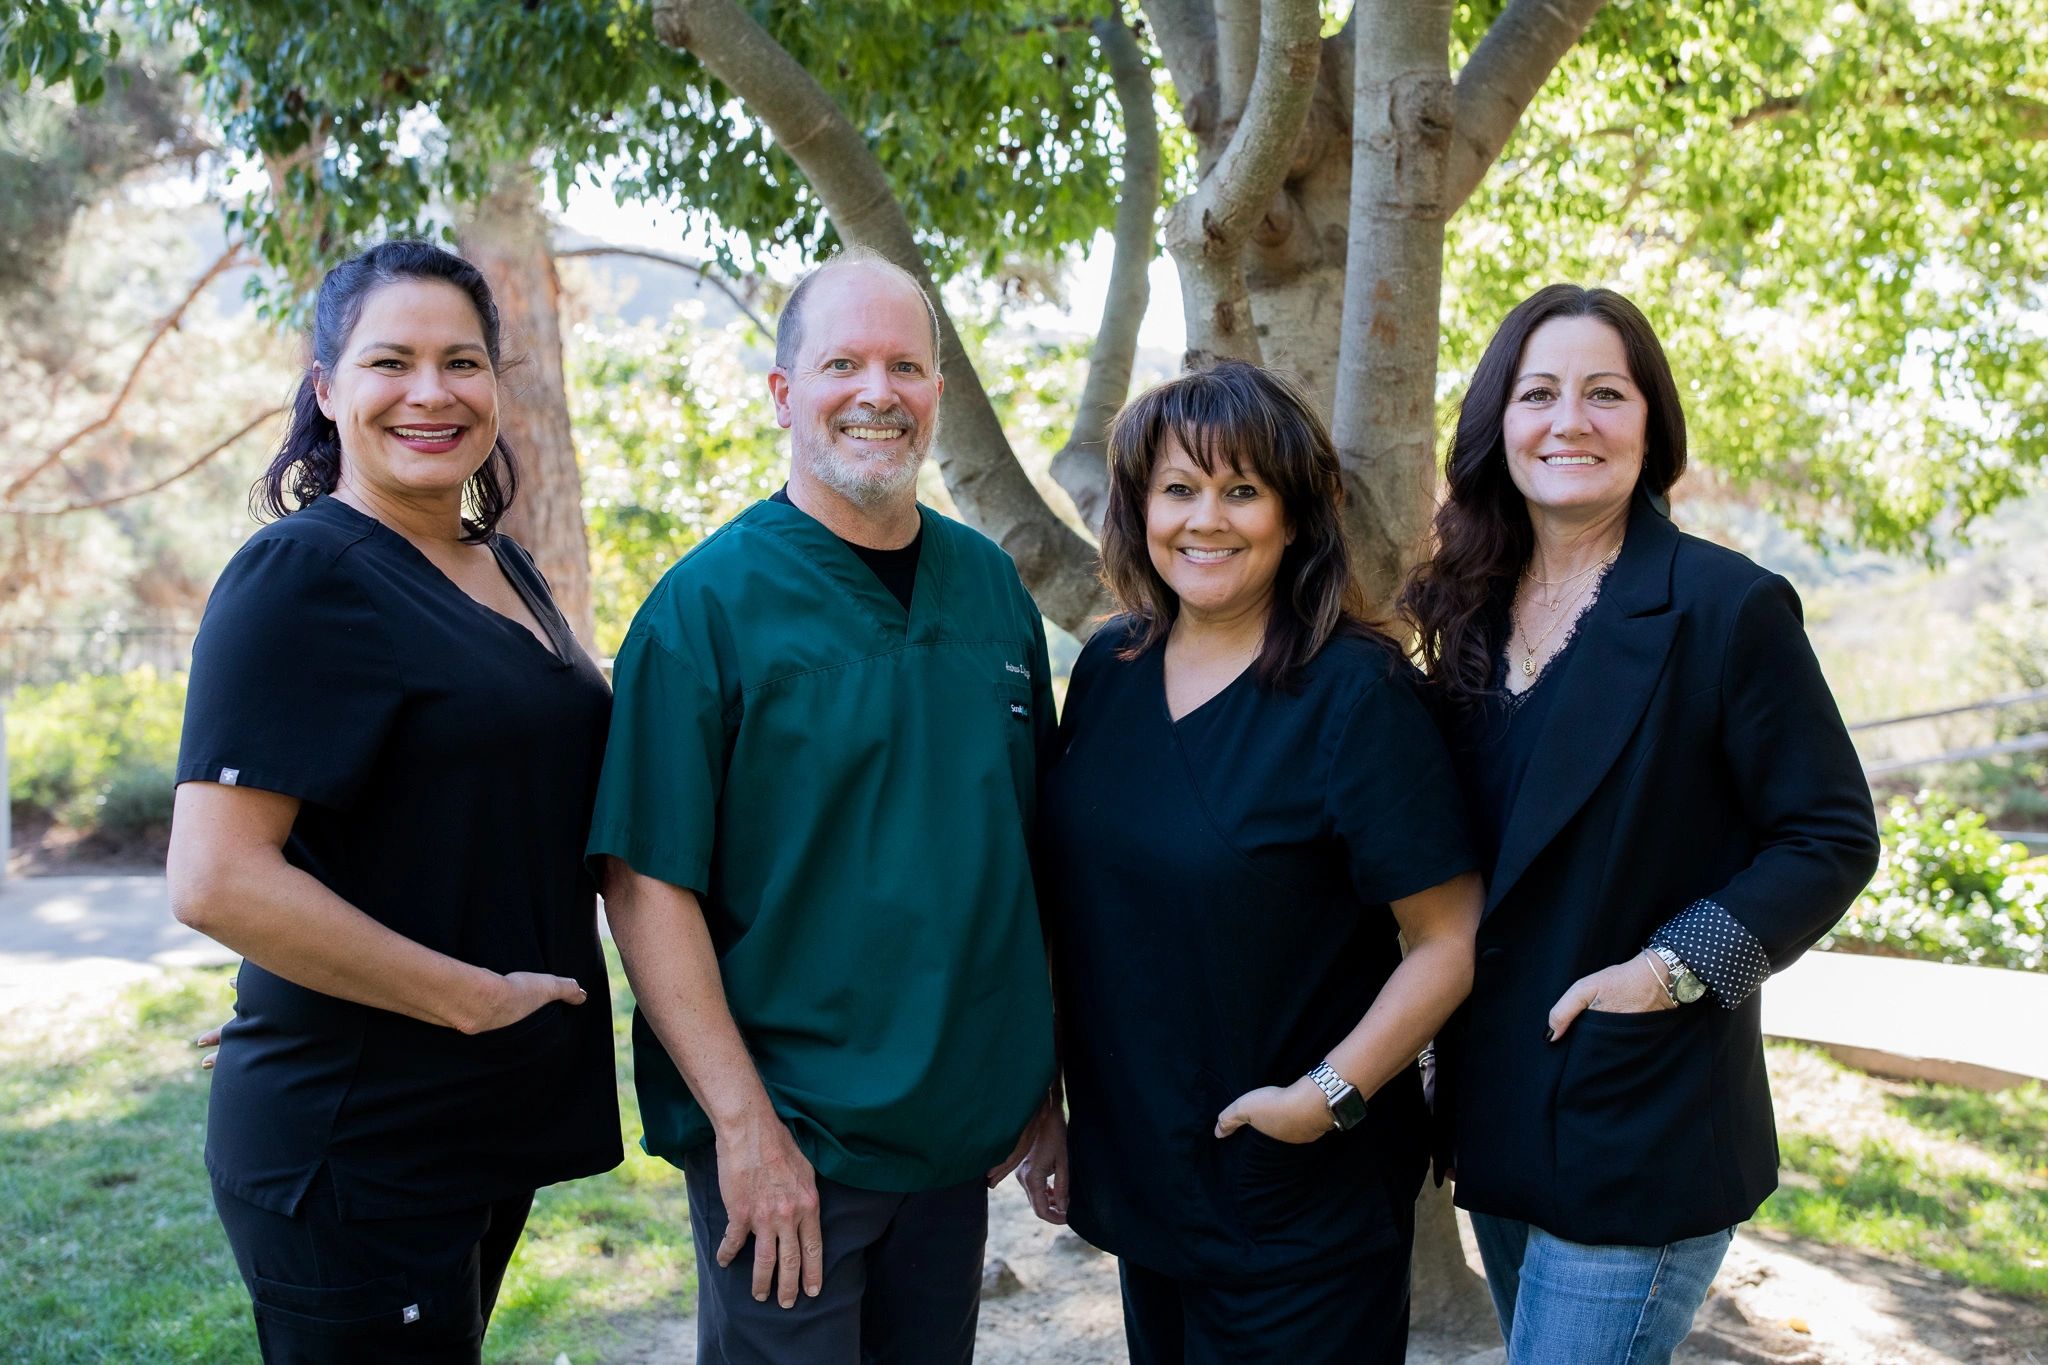 Softley Dental staff smiling and standing next to each other in a park 